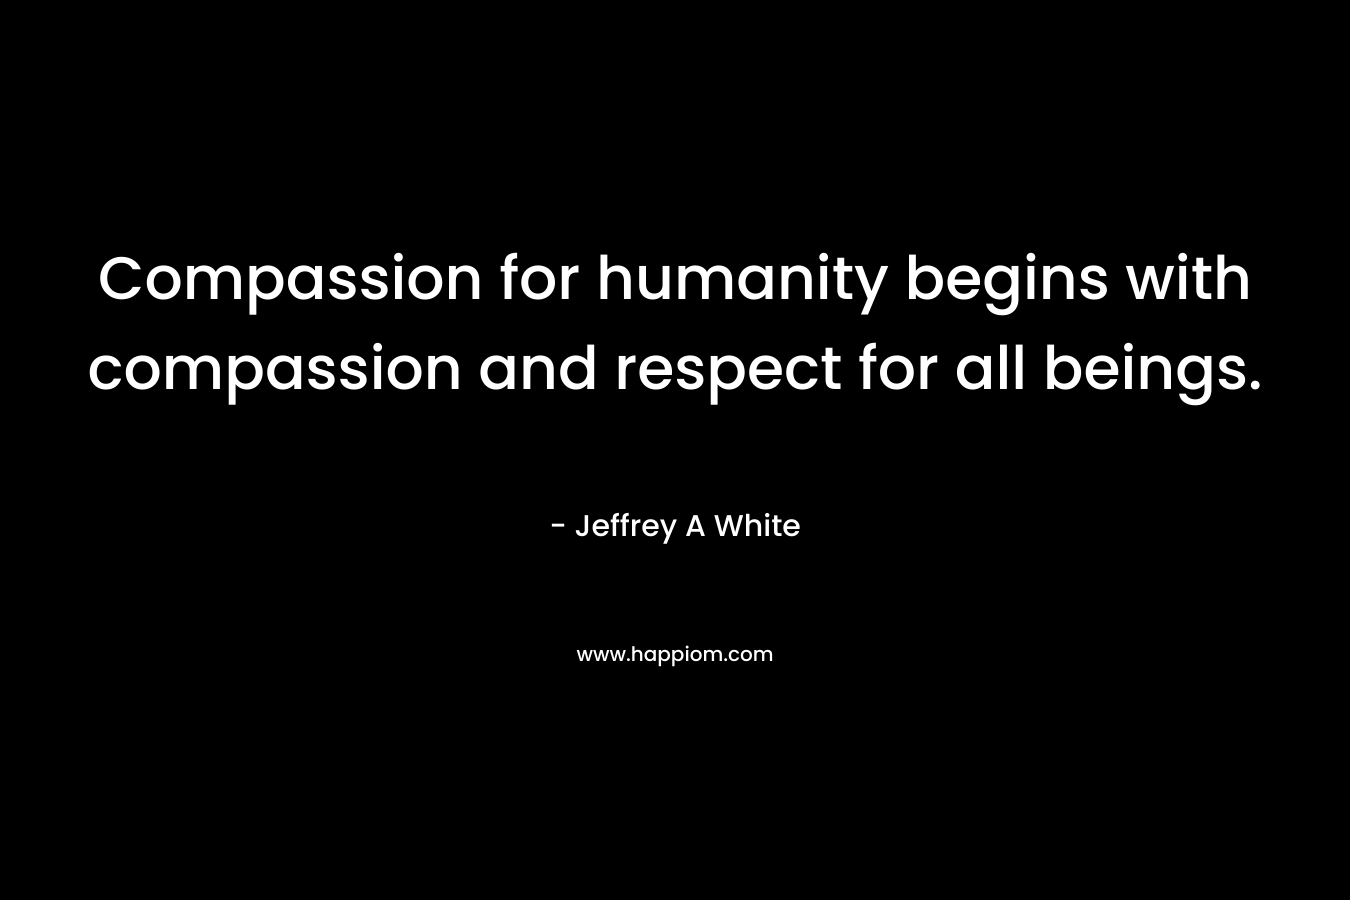 Compassion for humanity begins with compassion and respect for all beings.